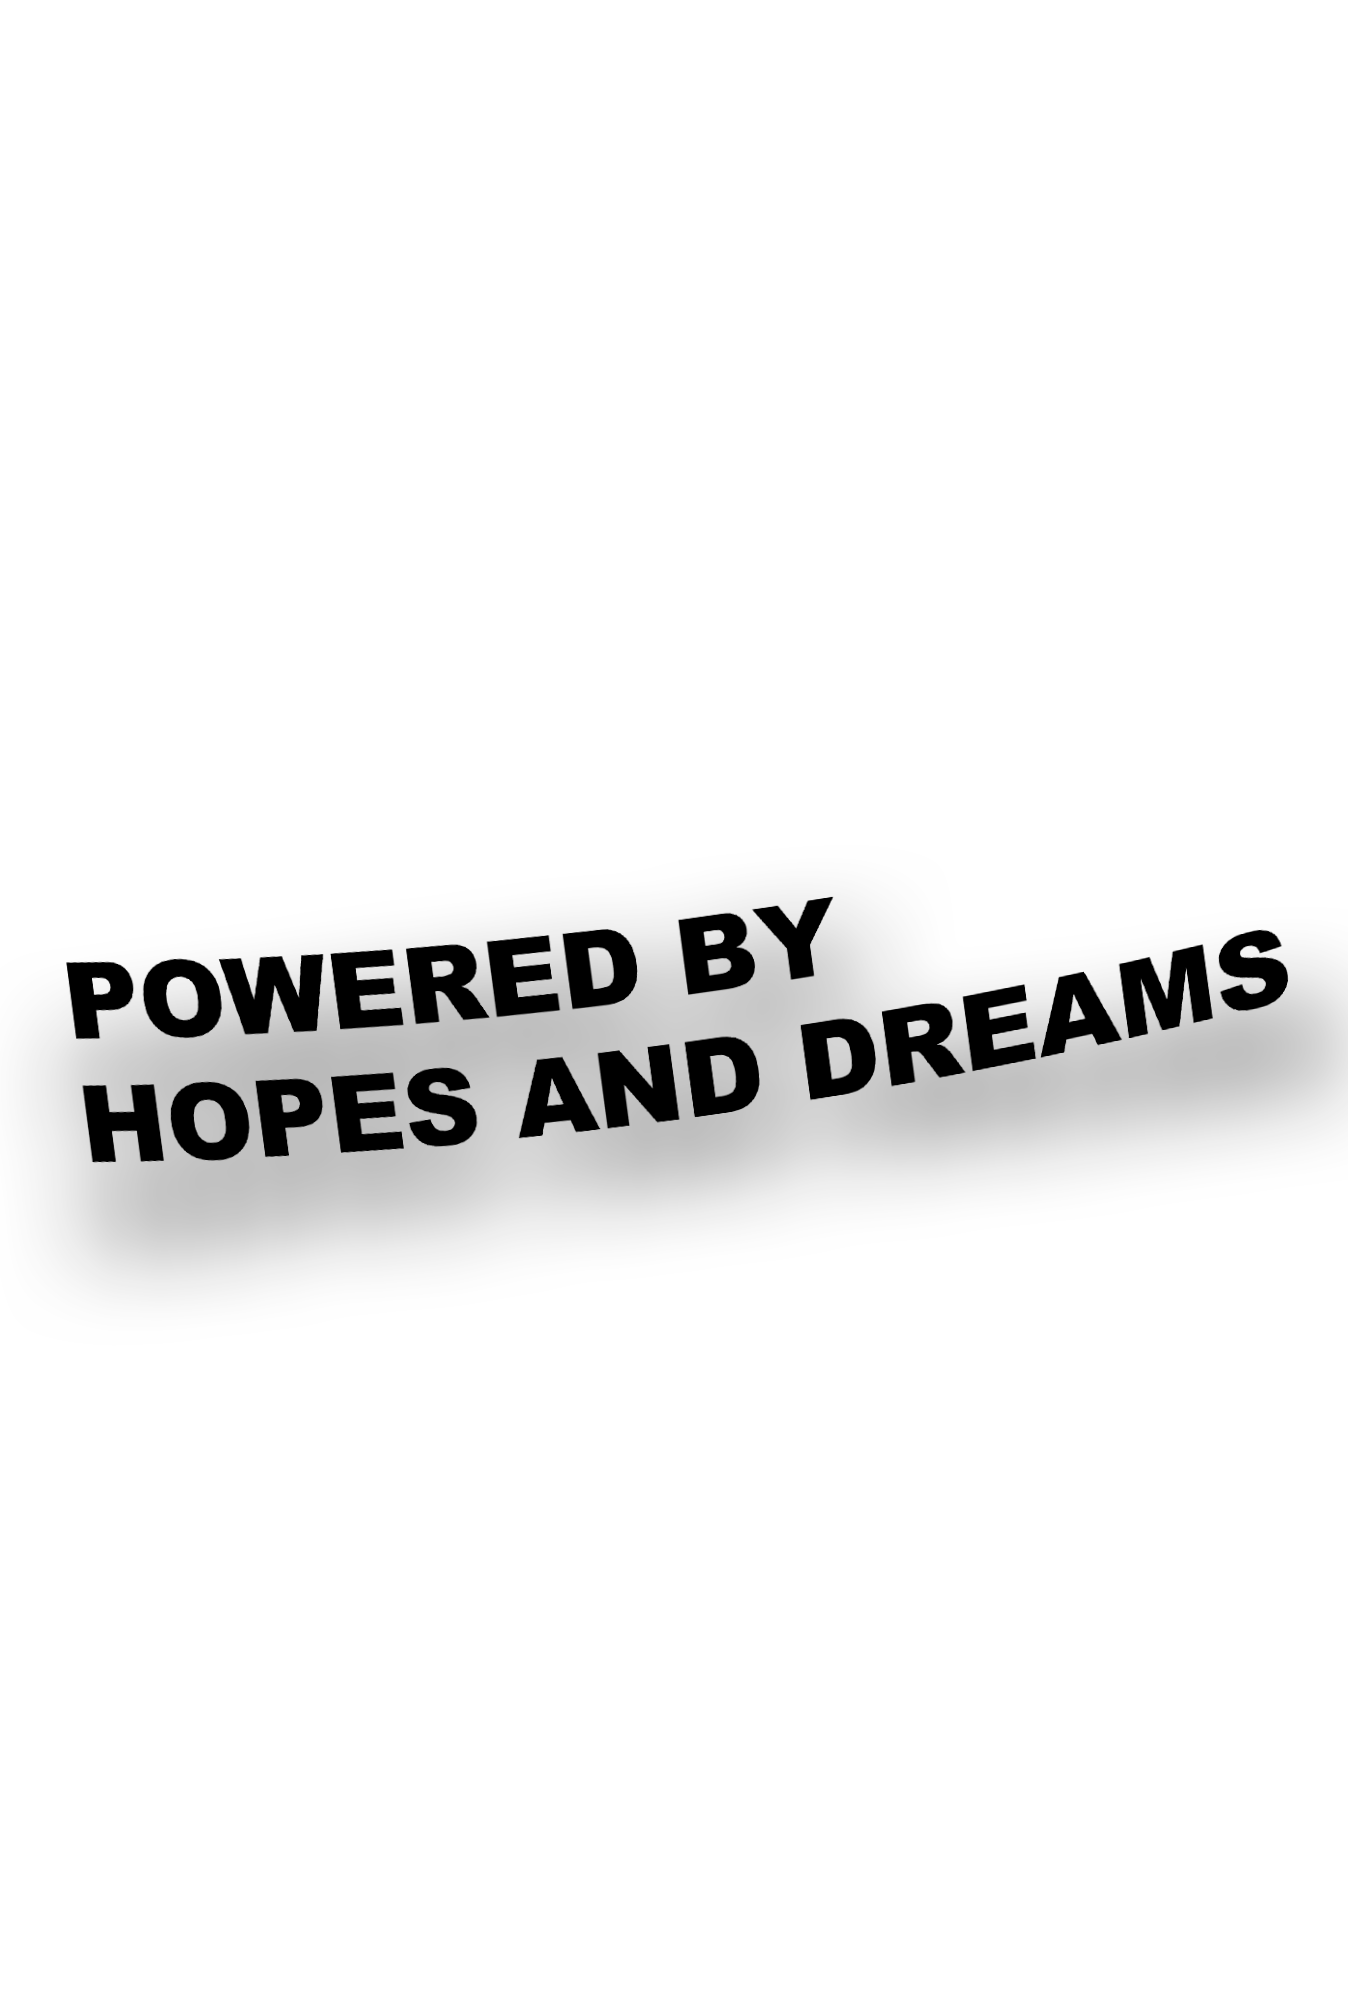 ''Power by hopes and dreams'' - Plotted Vinyl Sticker